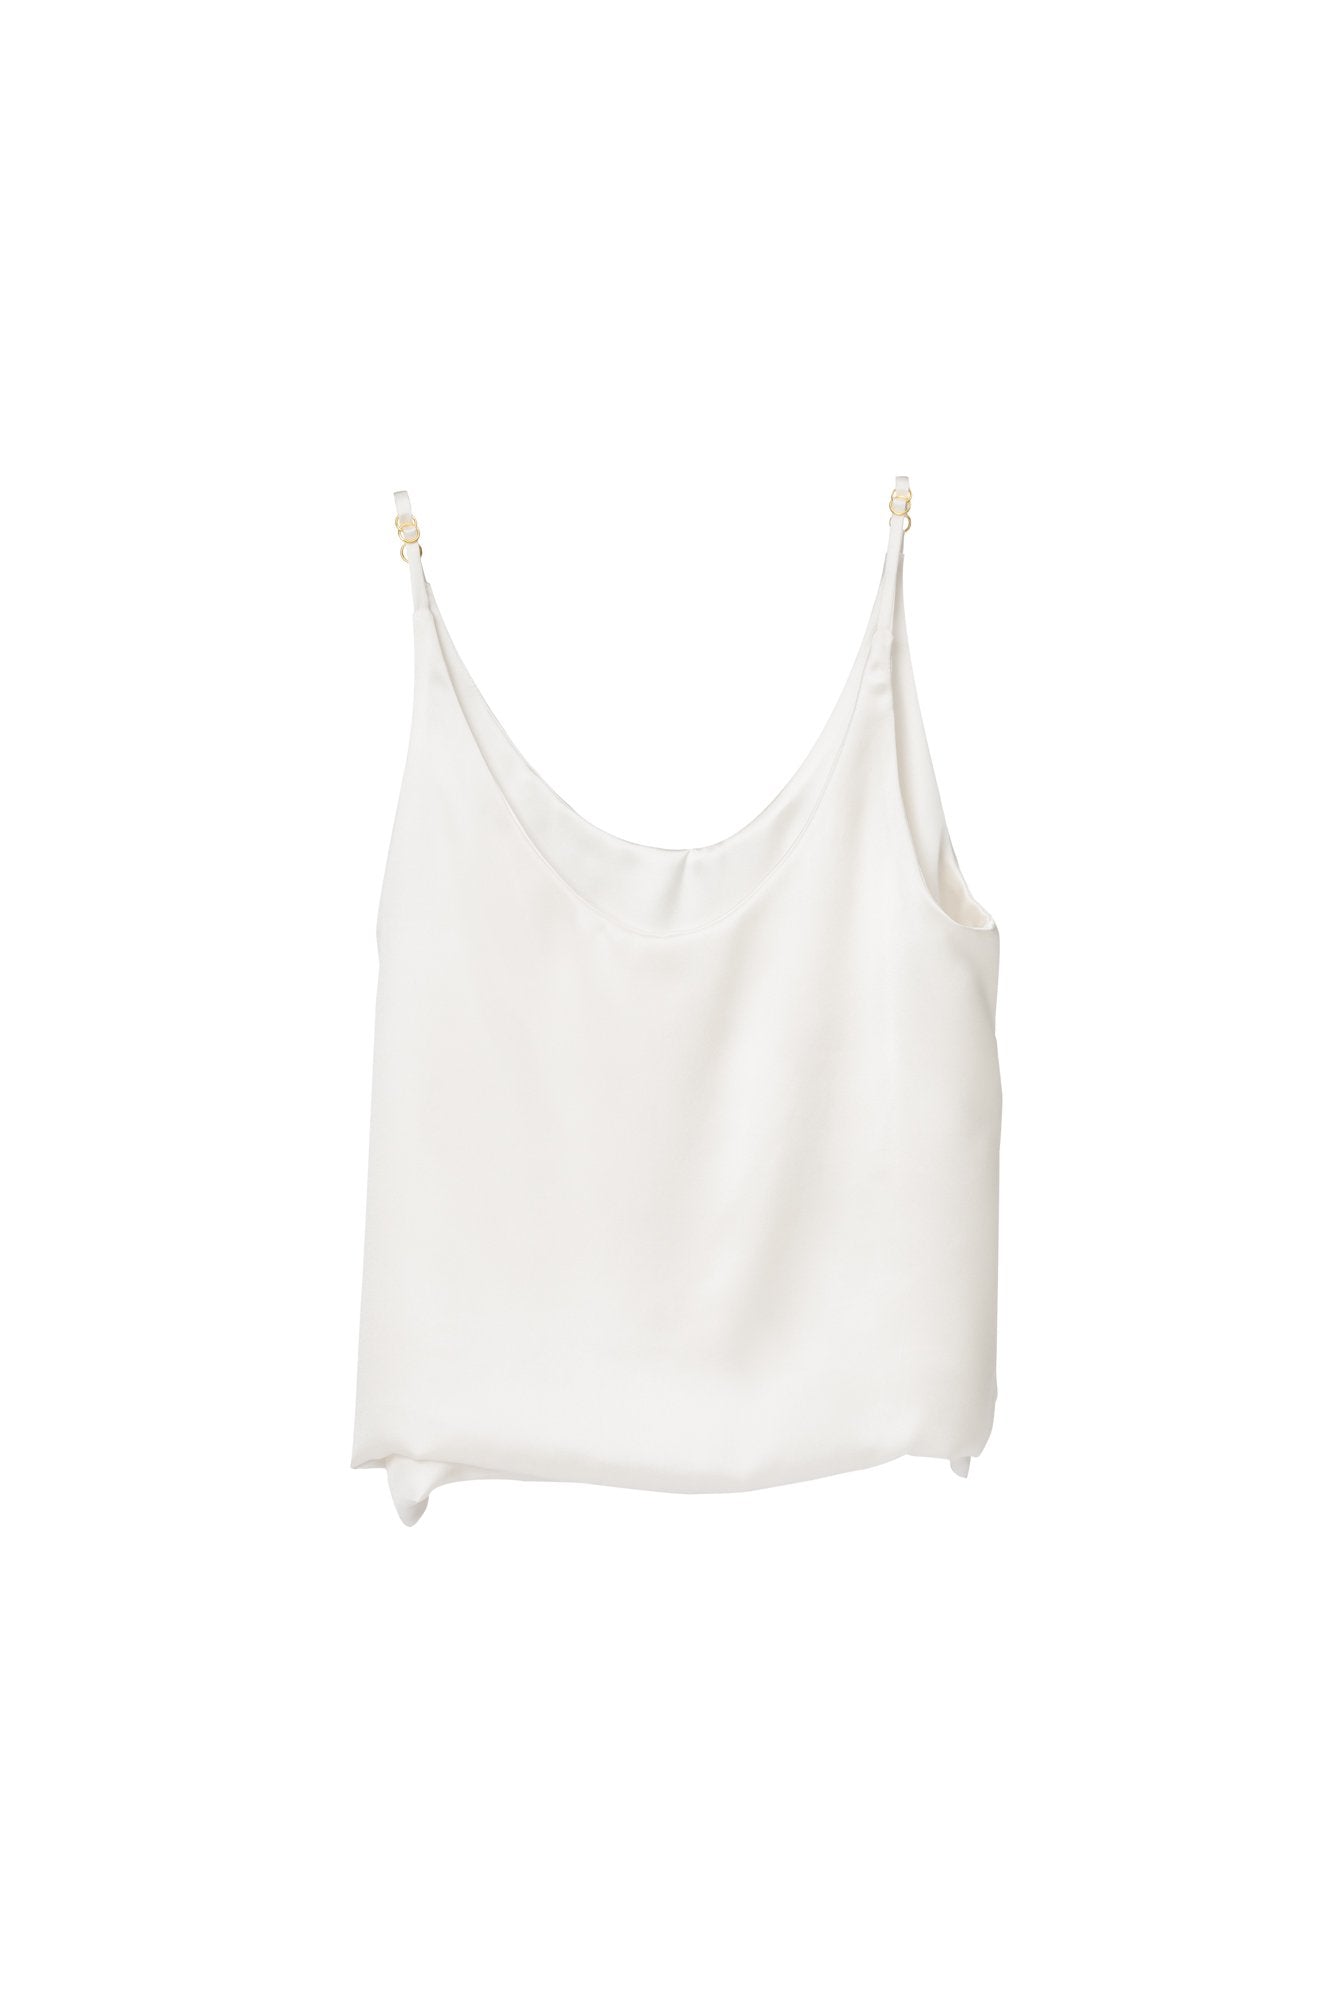 Silk Camisole in Ivory  - NEW Prolonged Edition - silk&jam